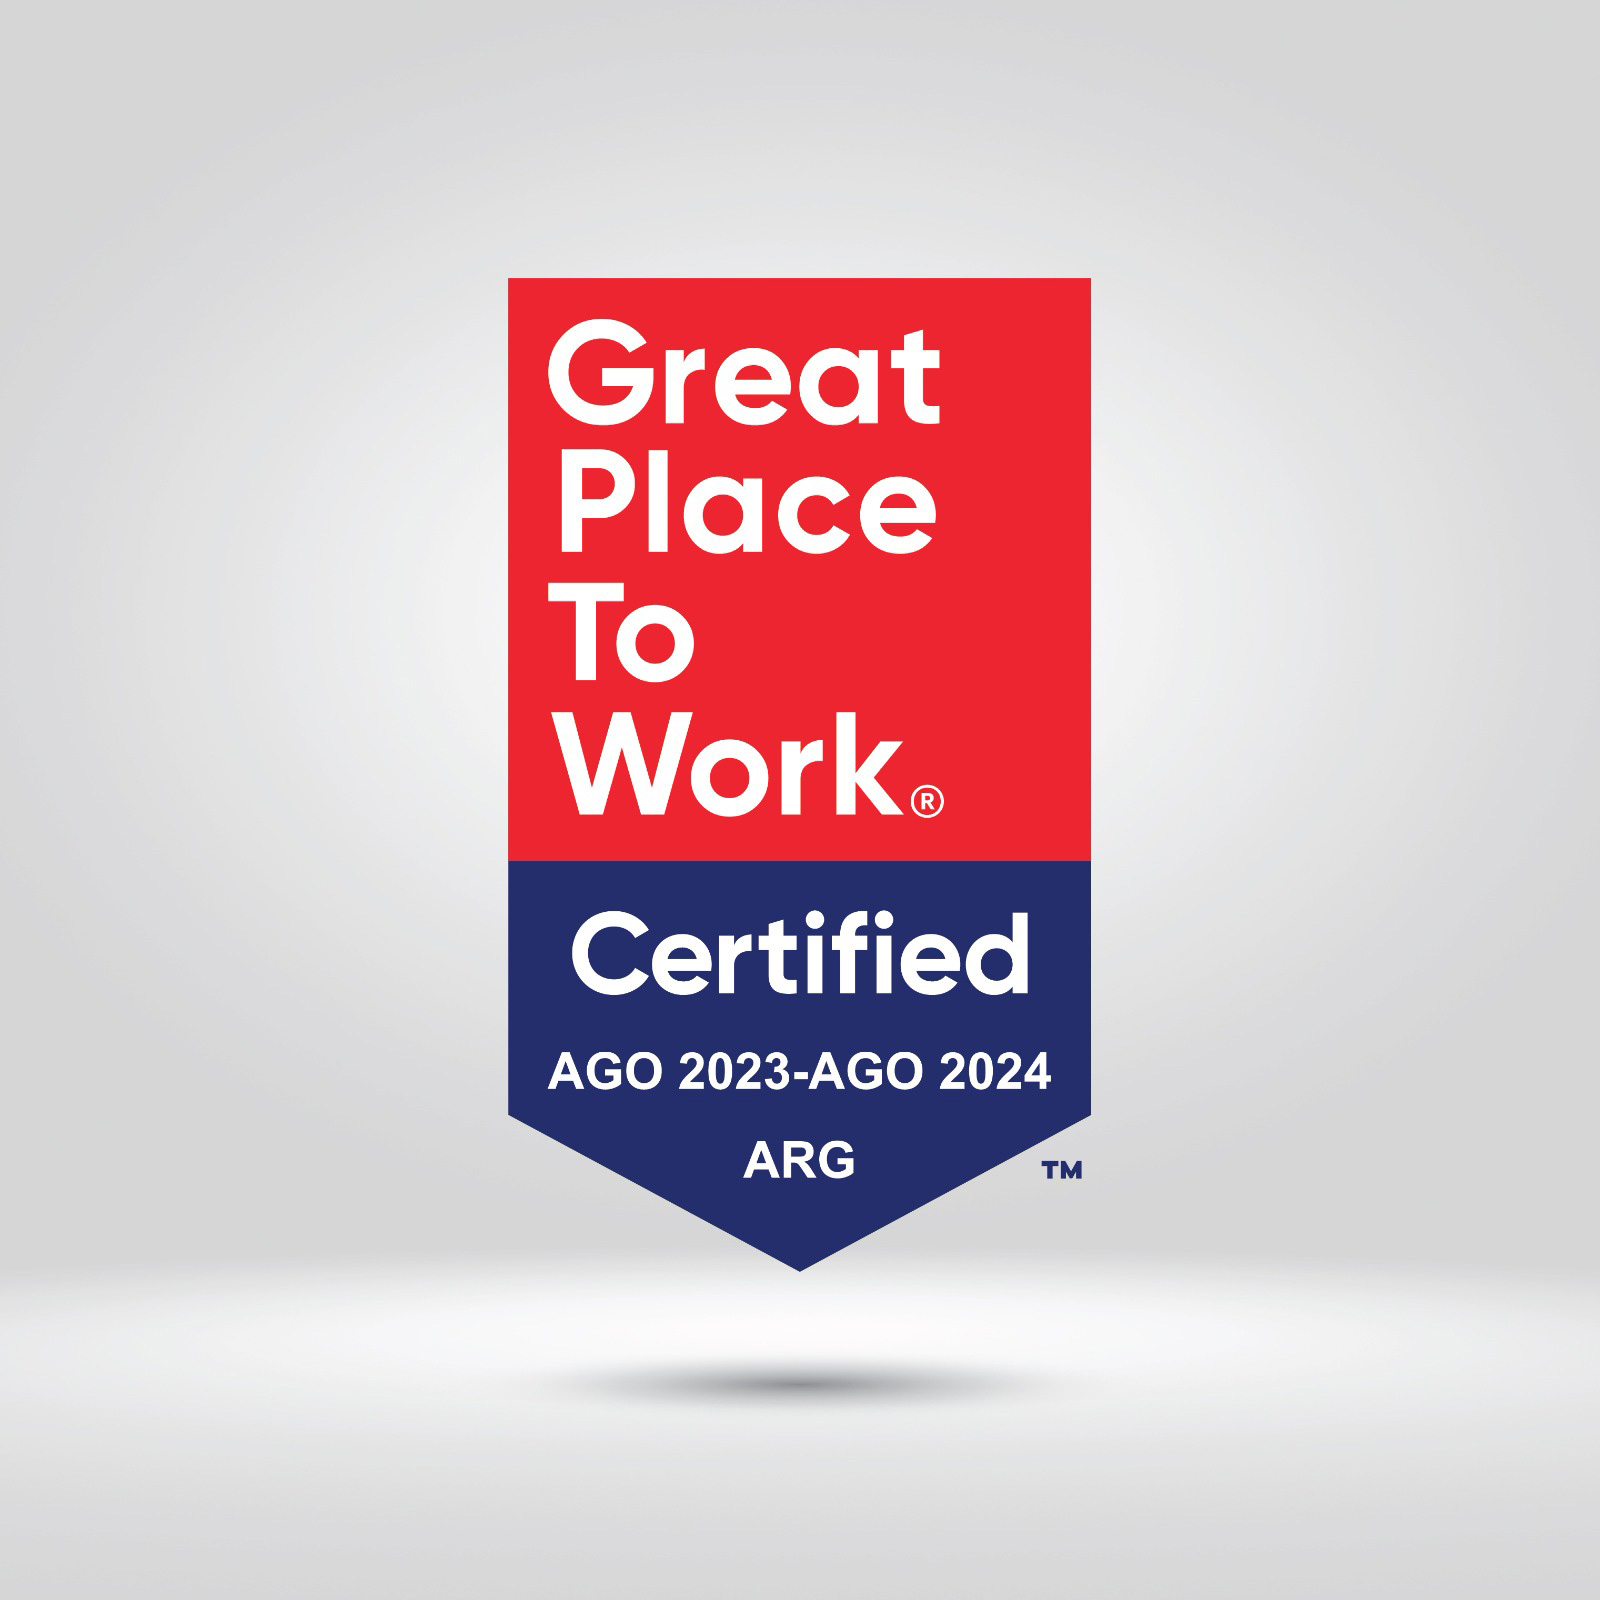 Bruchou & Funes de Rioja certified as a Great Place to Work in Argentina